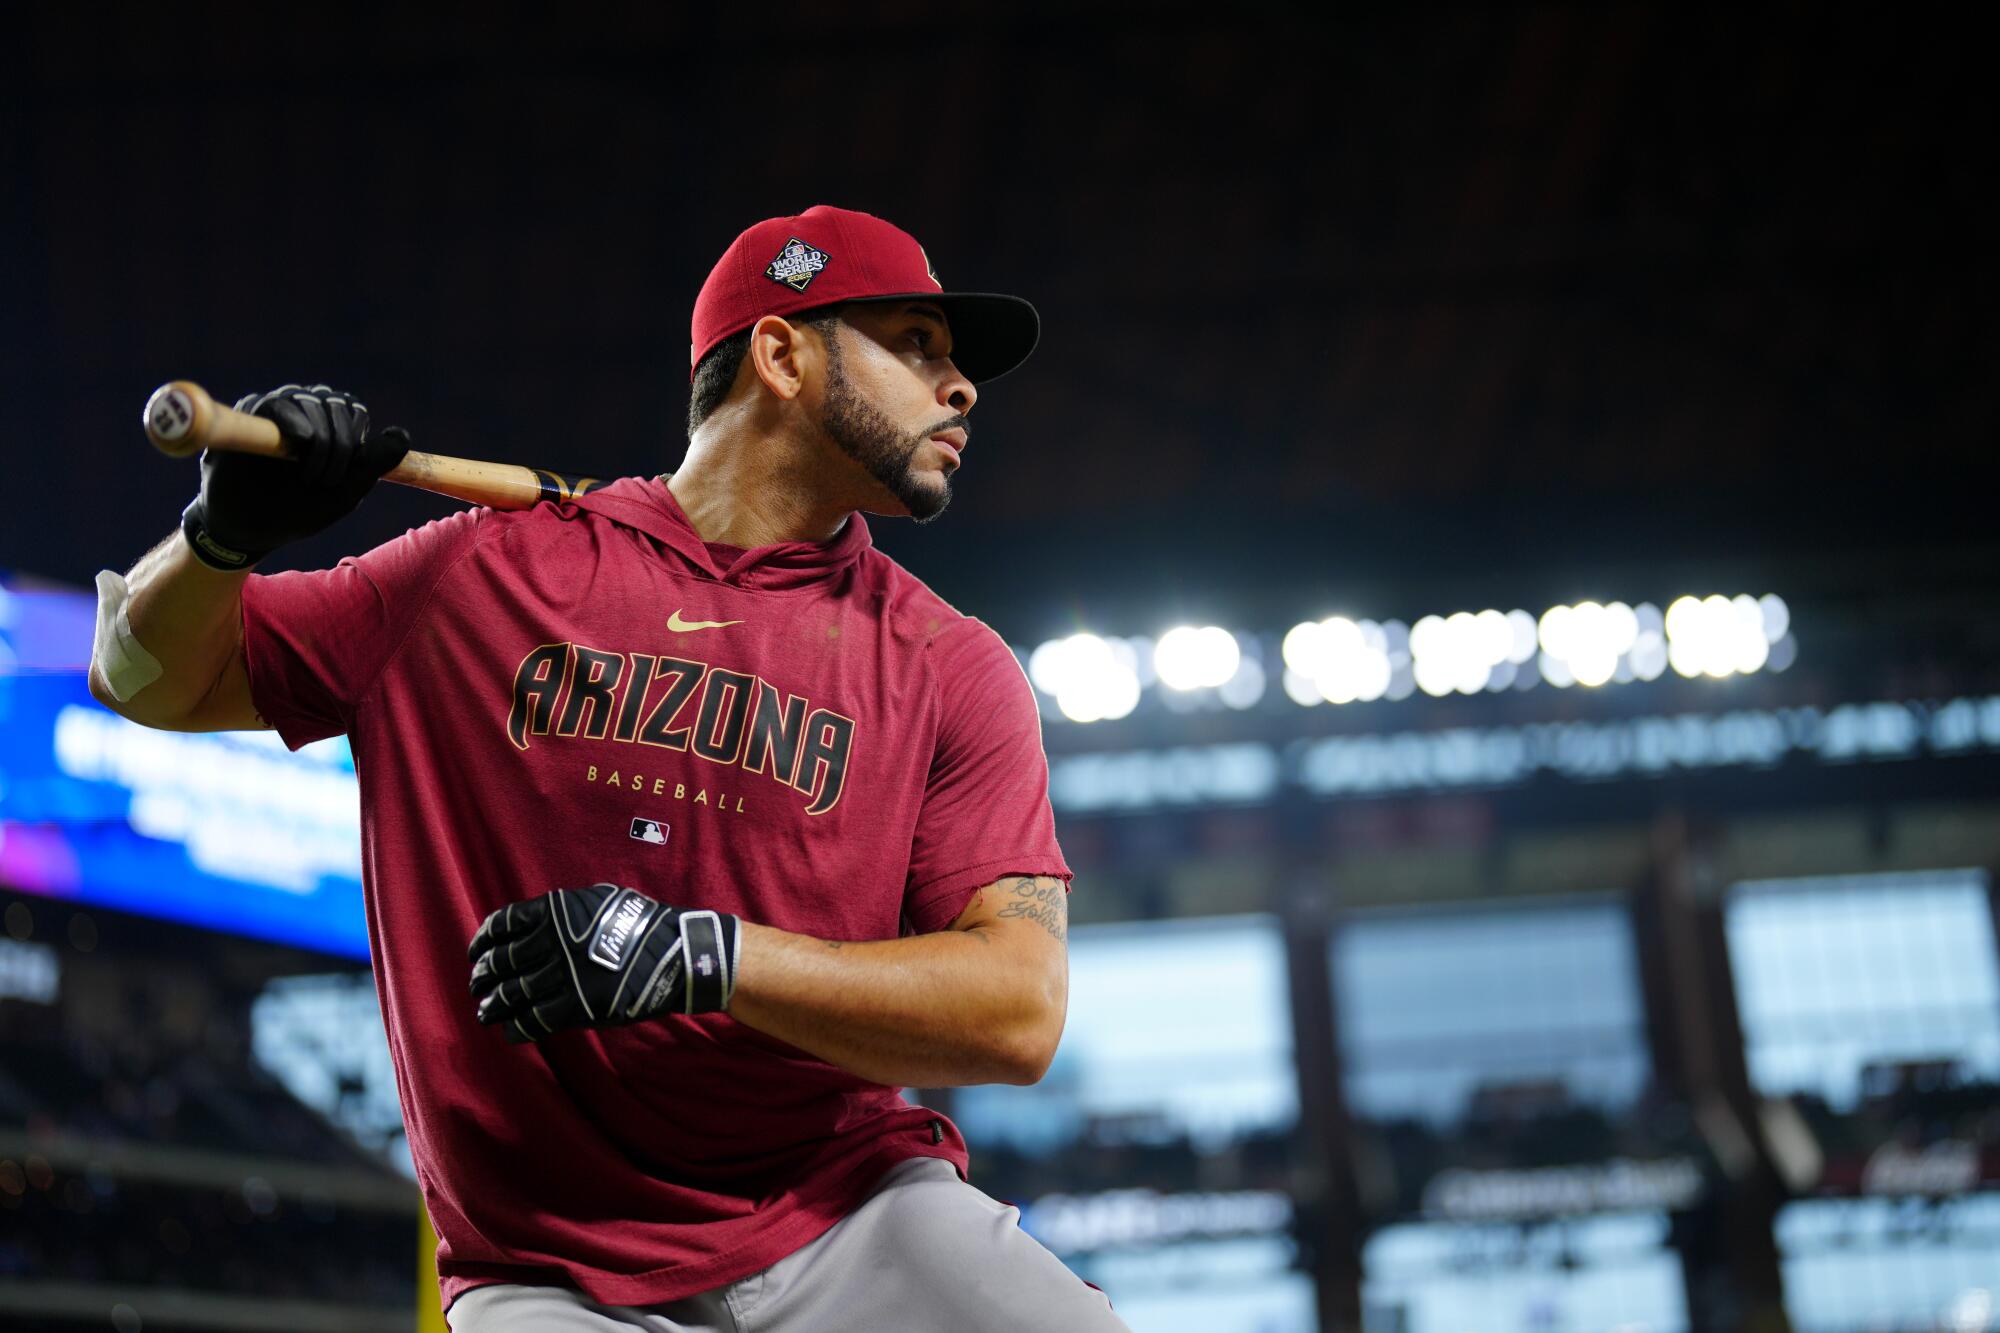 Arizona Diamondbacks outfielder Tommy Pham warms up during batting practice before Game 2 of the World Series.